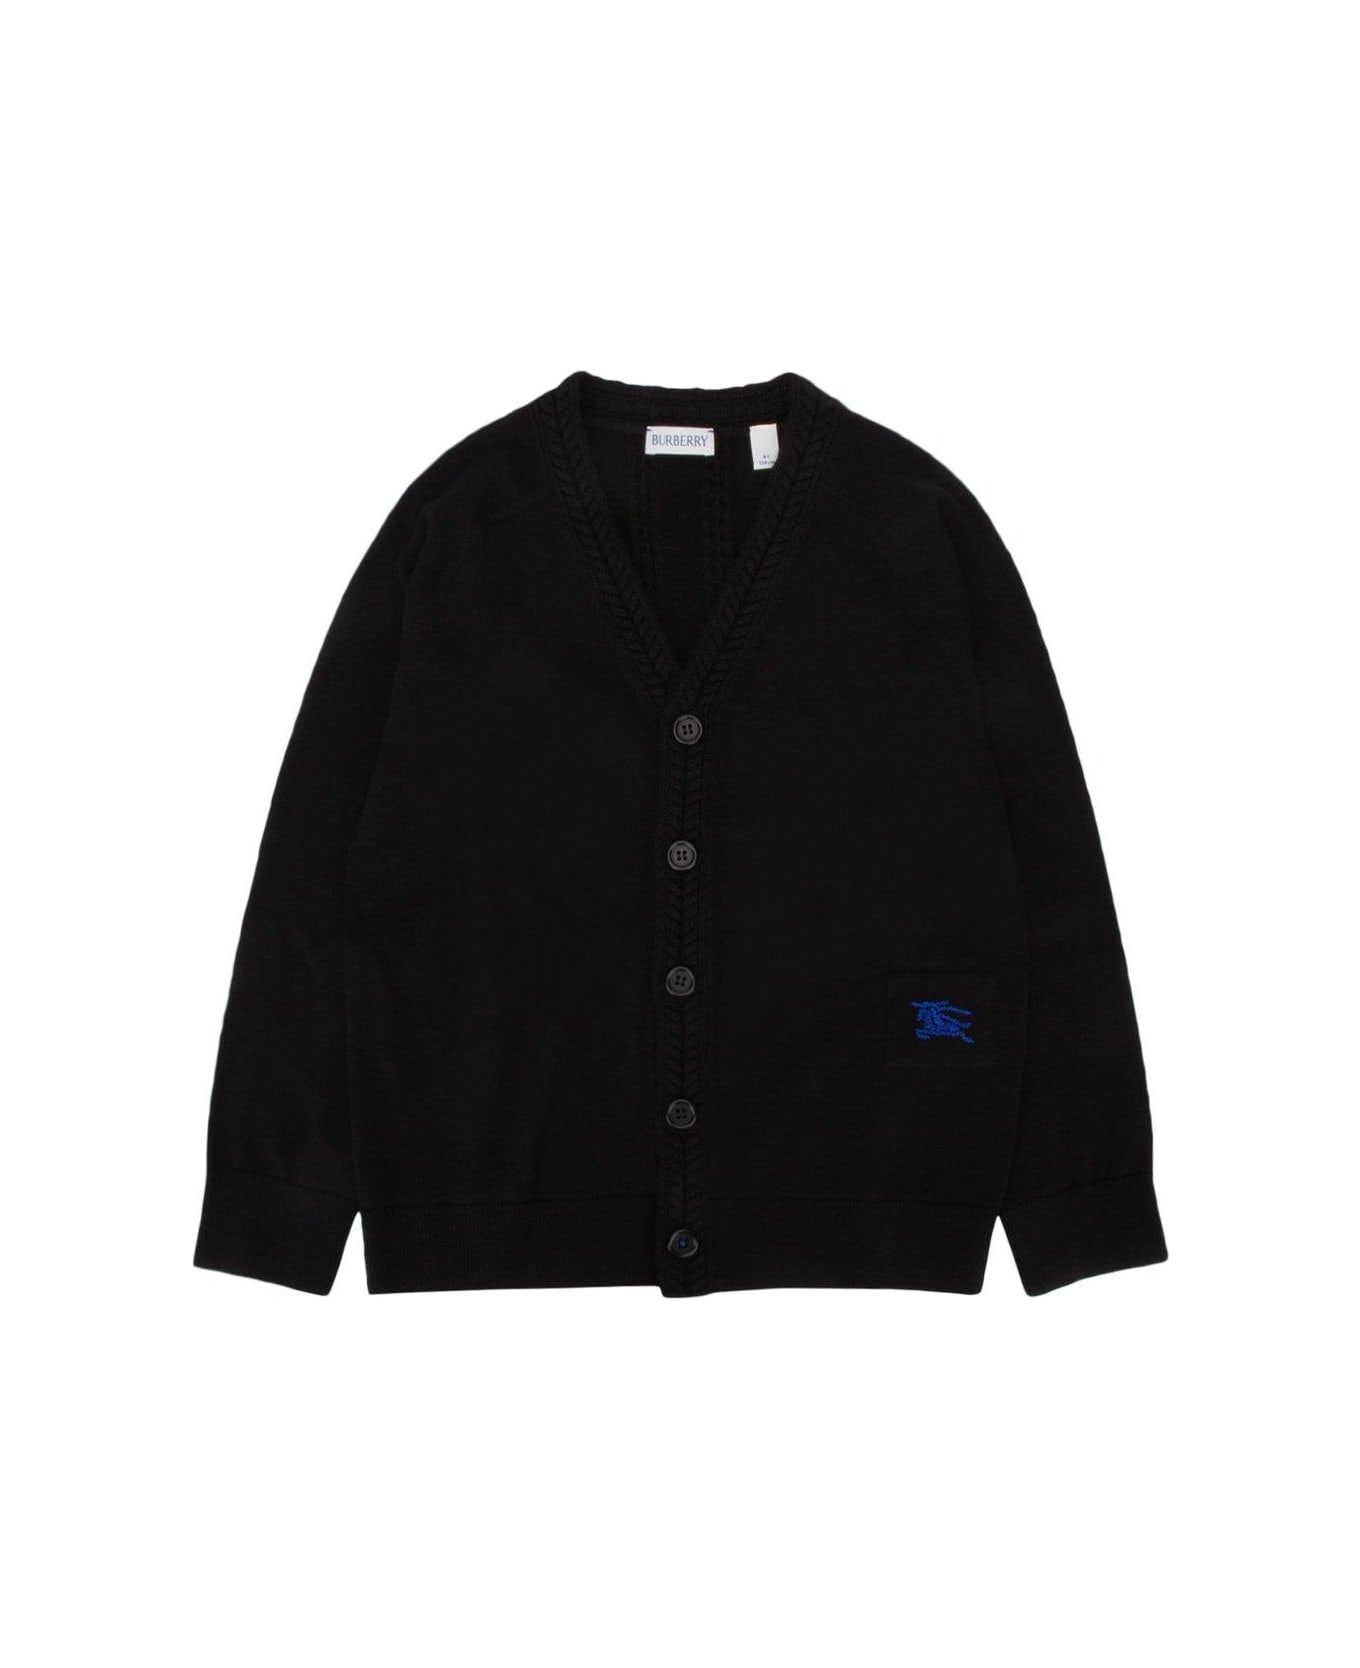 Burberry Ekd Patch Knitted Cardigan - BLACK/BROWN カーディガン